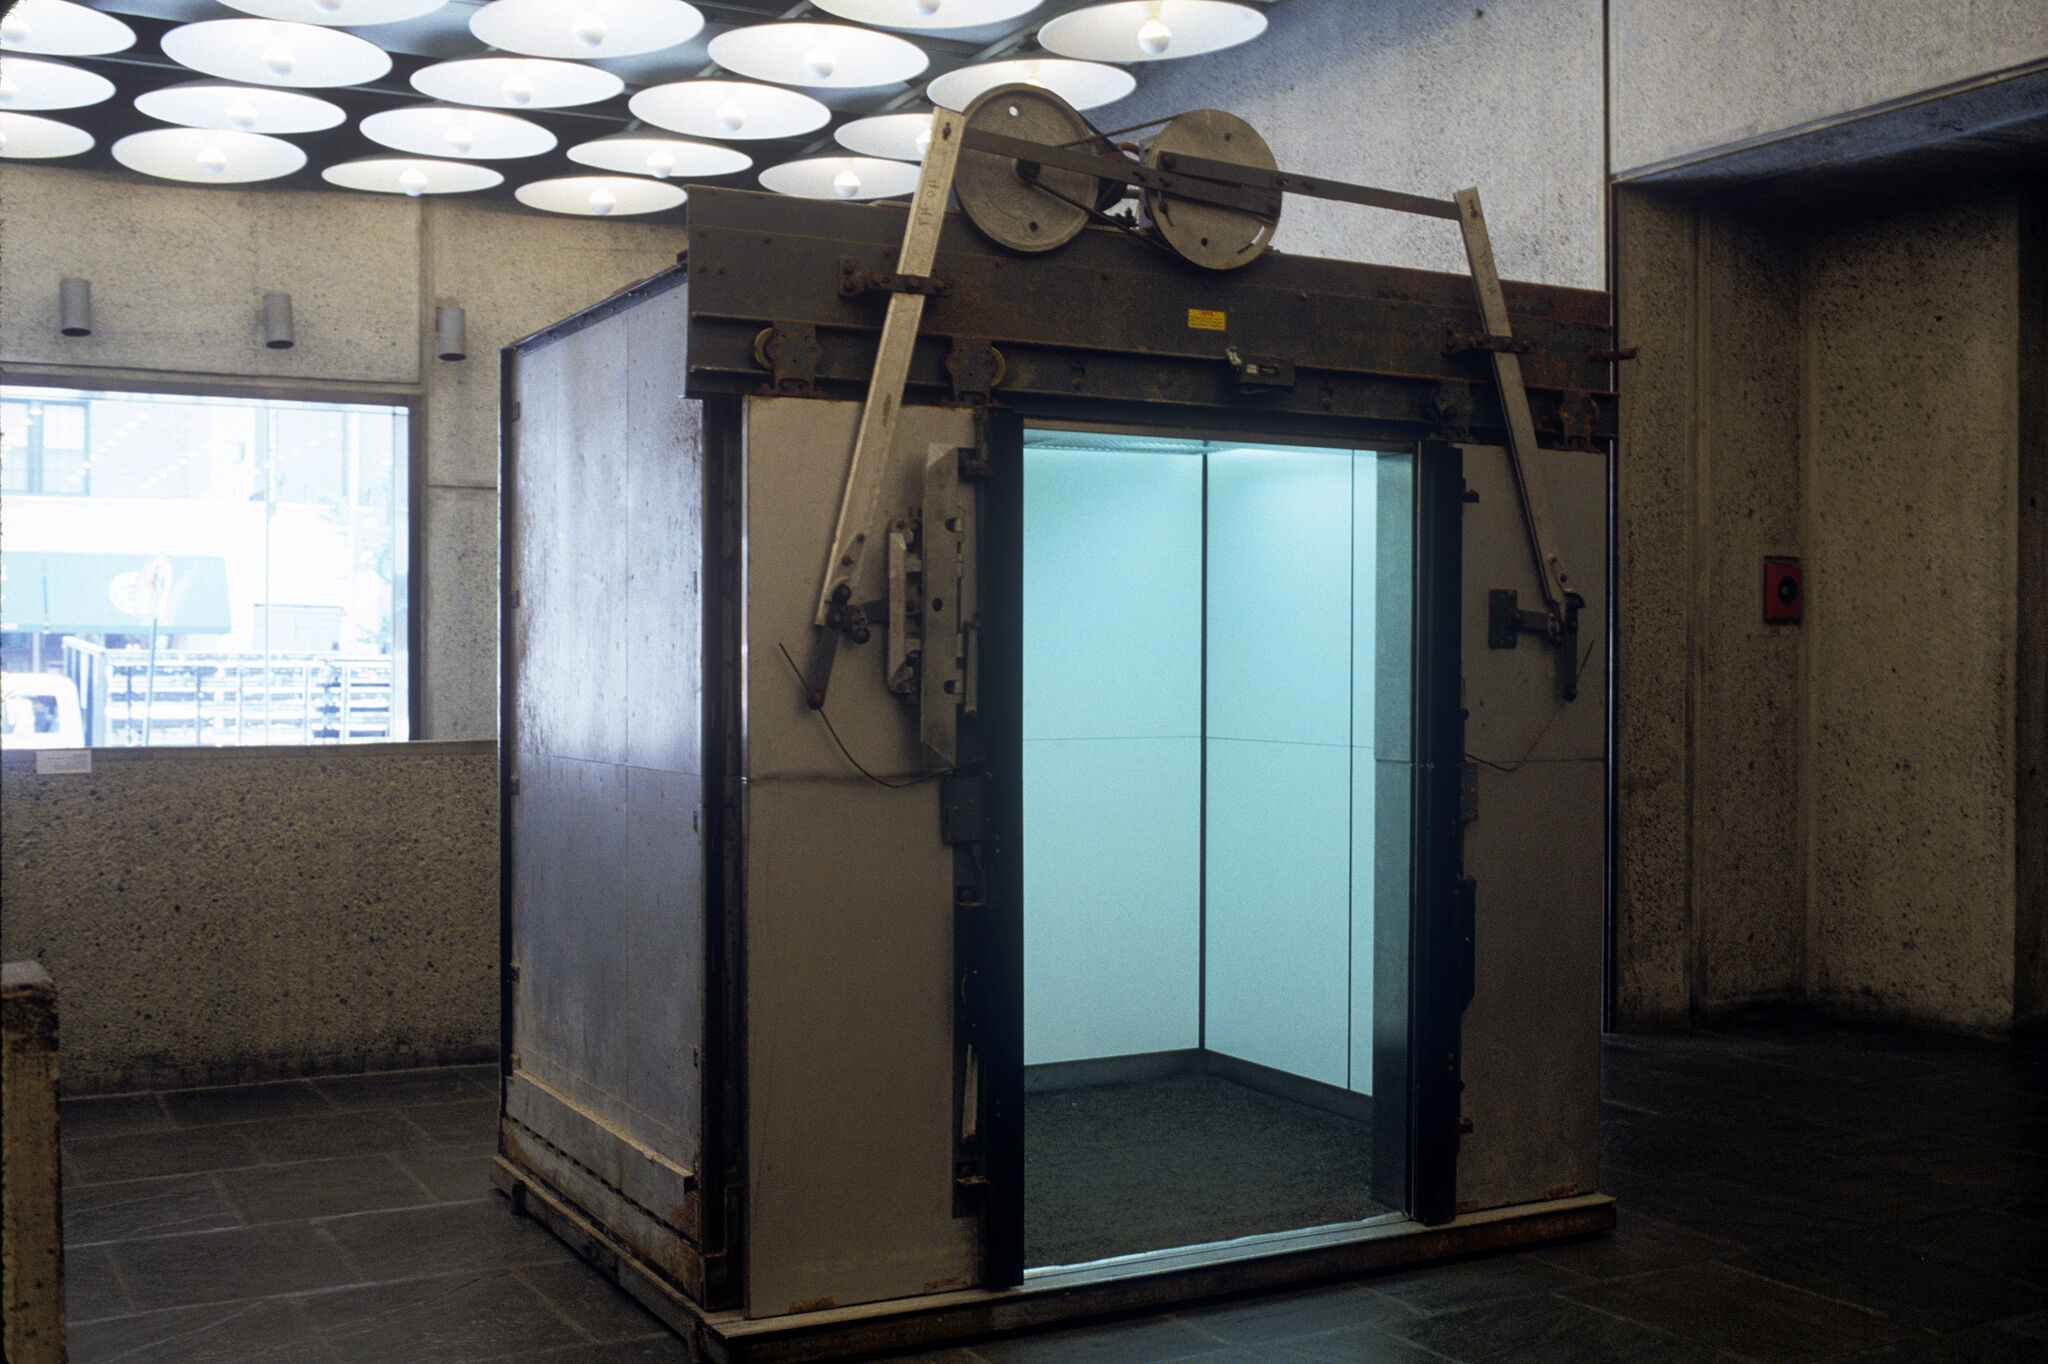 Elevator installed in a gallery.